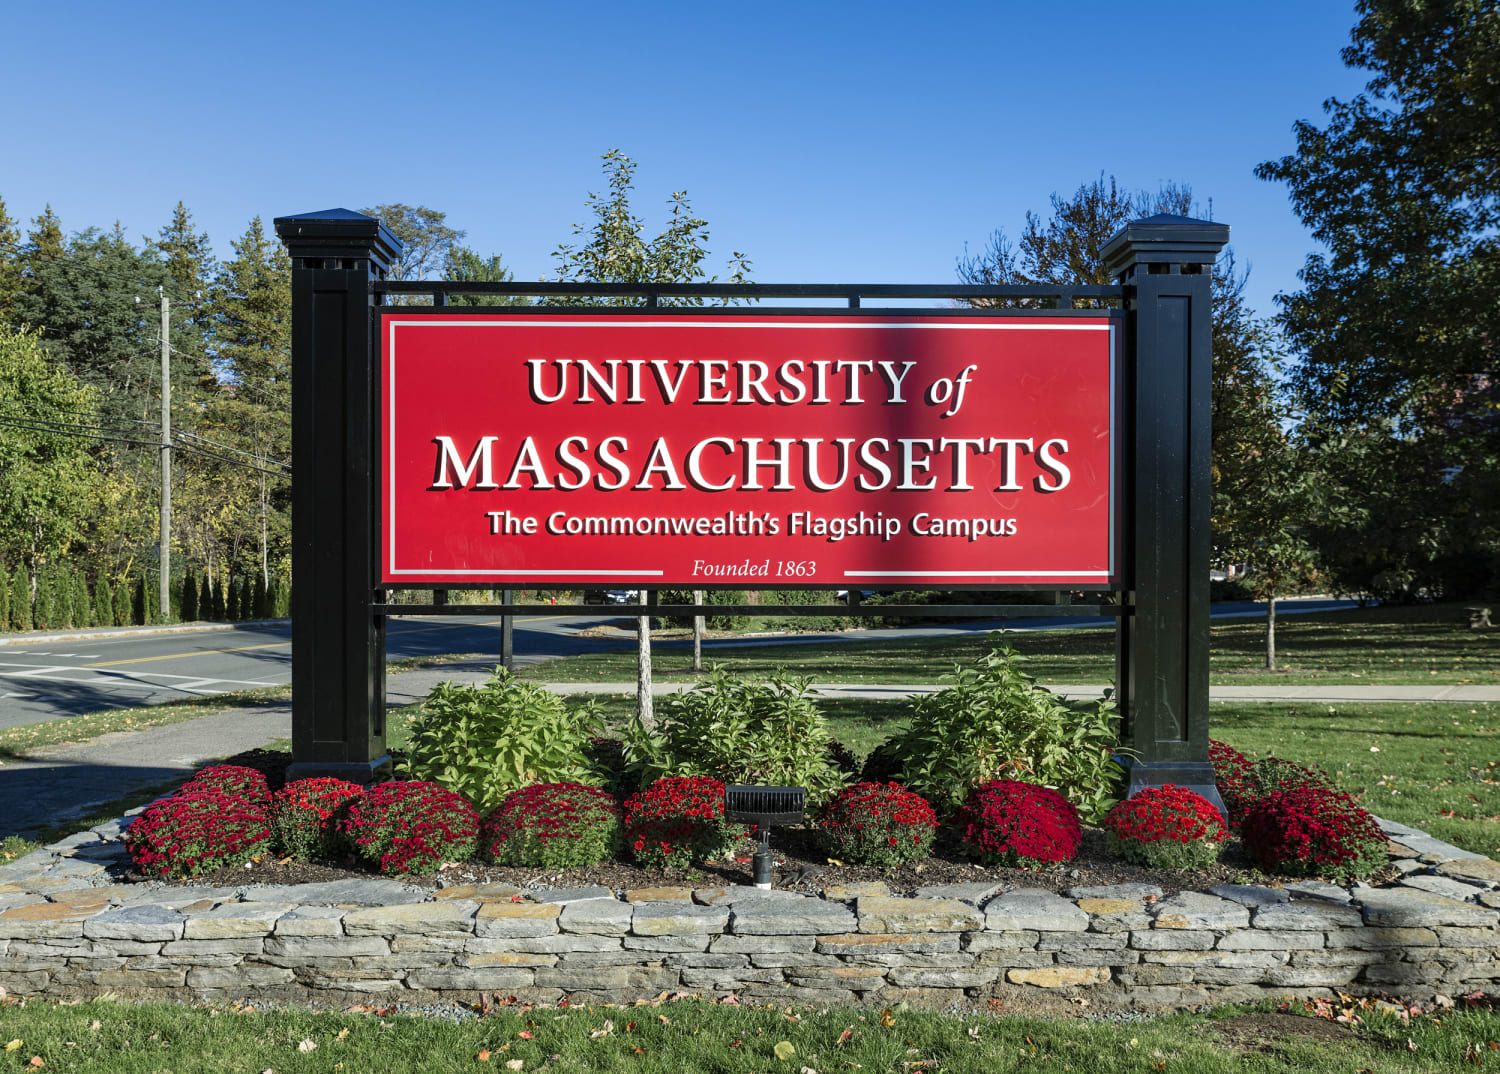 350 UMass students could face discipline for violating Covid protocols